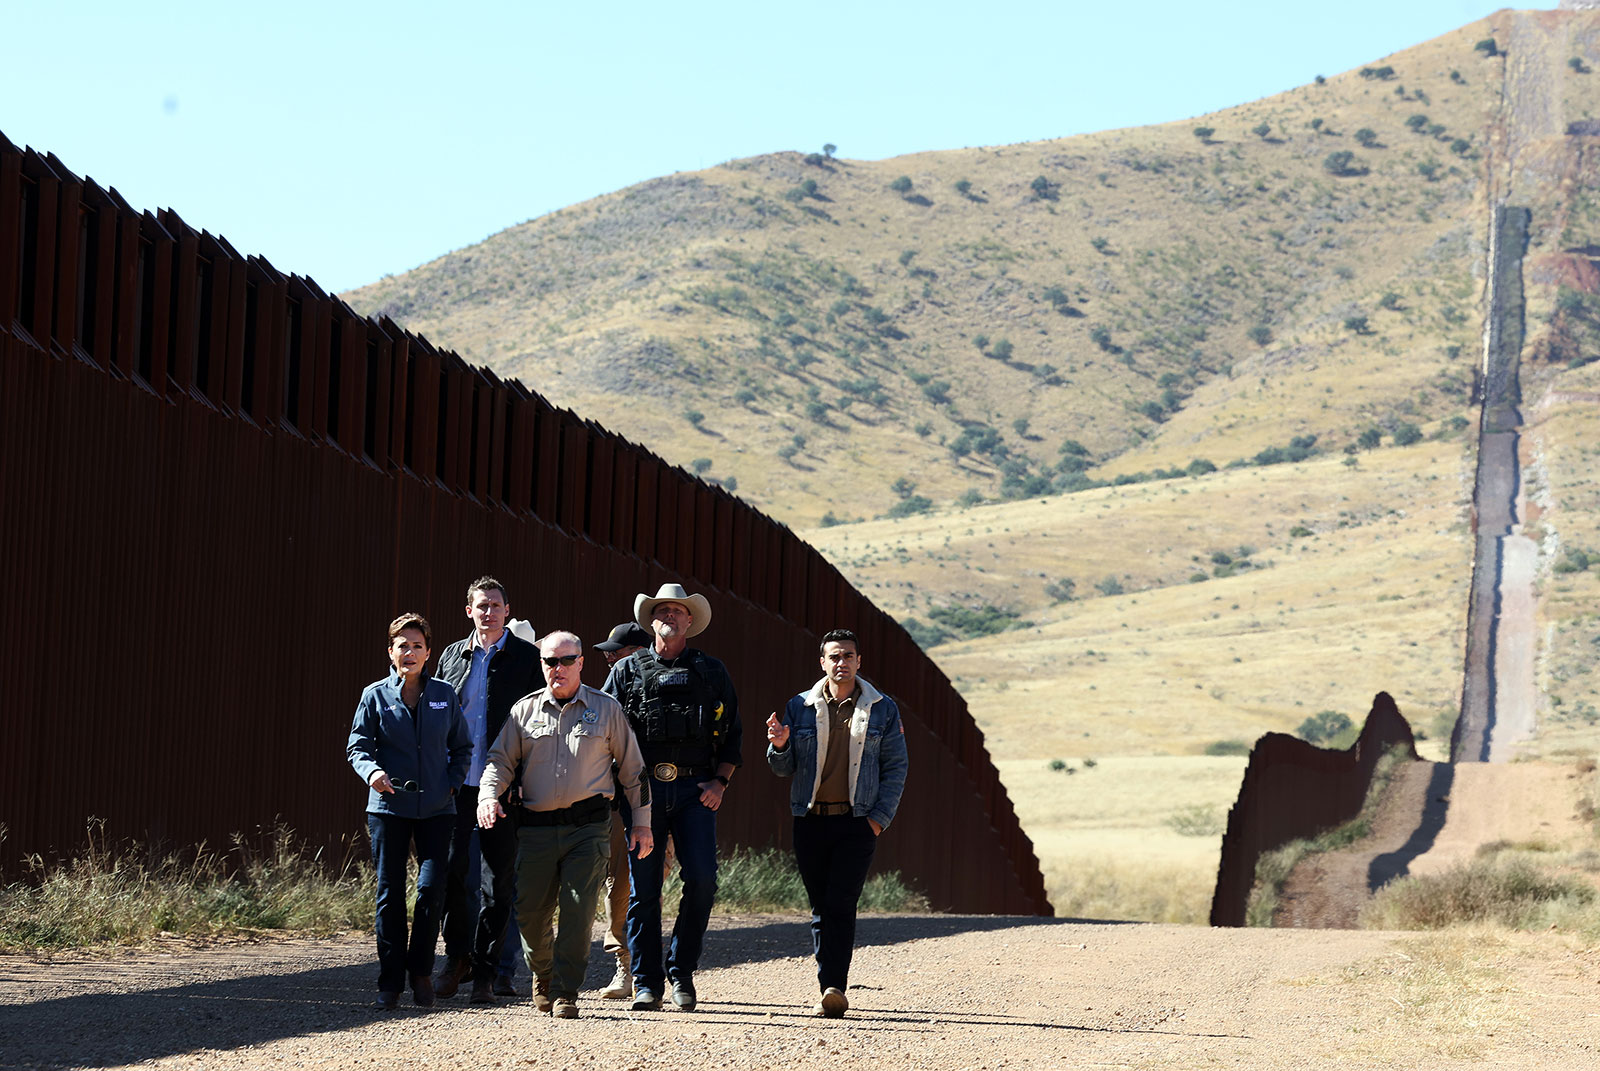 Kari Lake, left, Blake Masters, second left, Abraham Hamadeh, right, talk with Cochise County Sheriff Mark Dannels as they tour the US-Mexico border with law enforcement in Sierra Vista, Arizona on Friday.